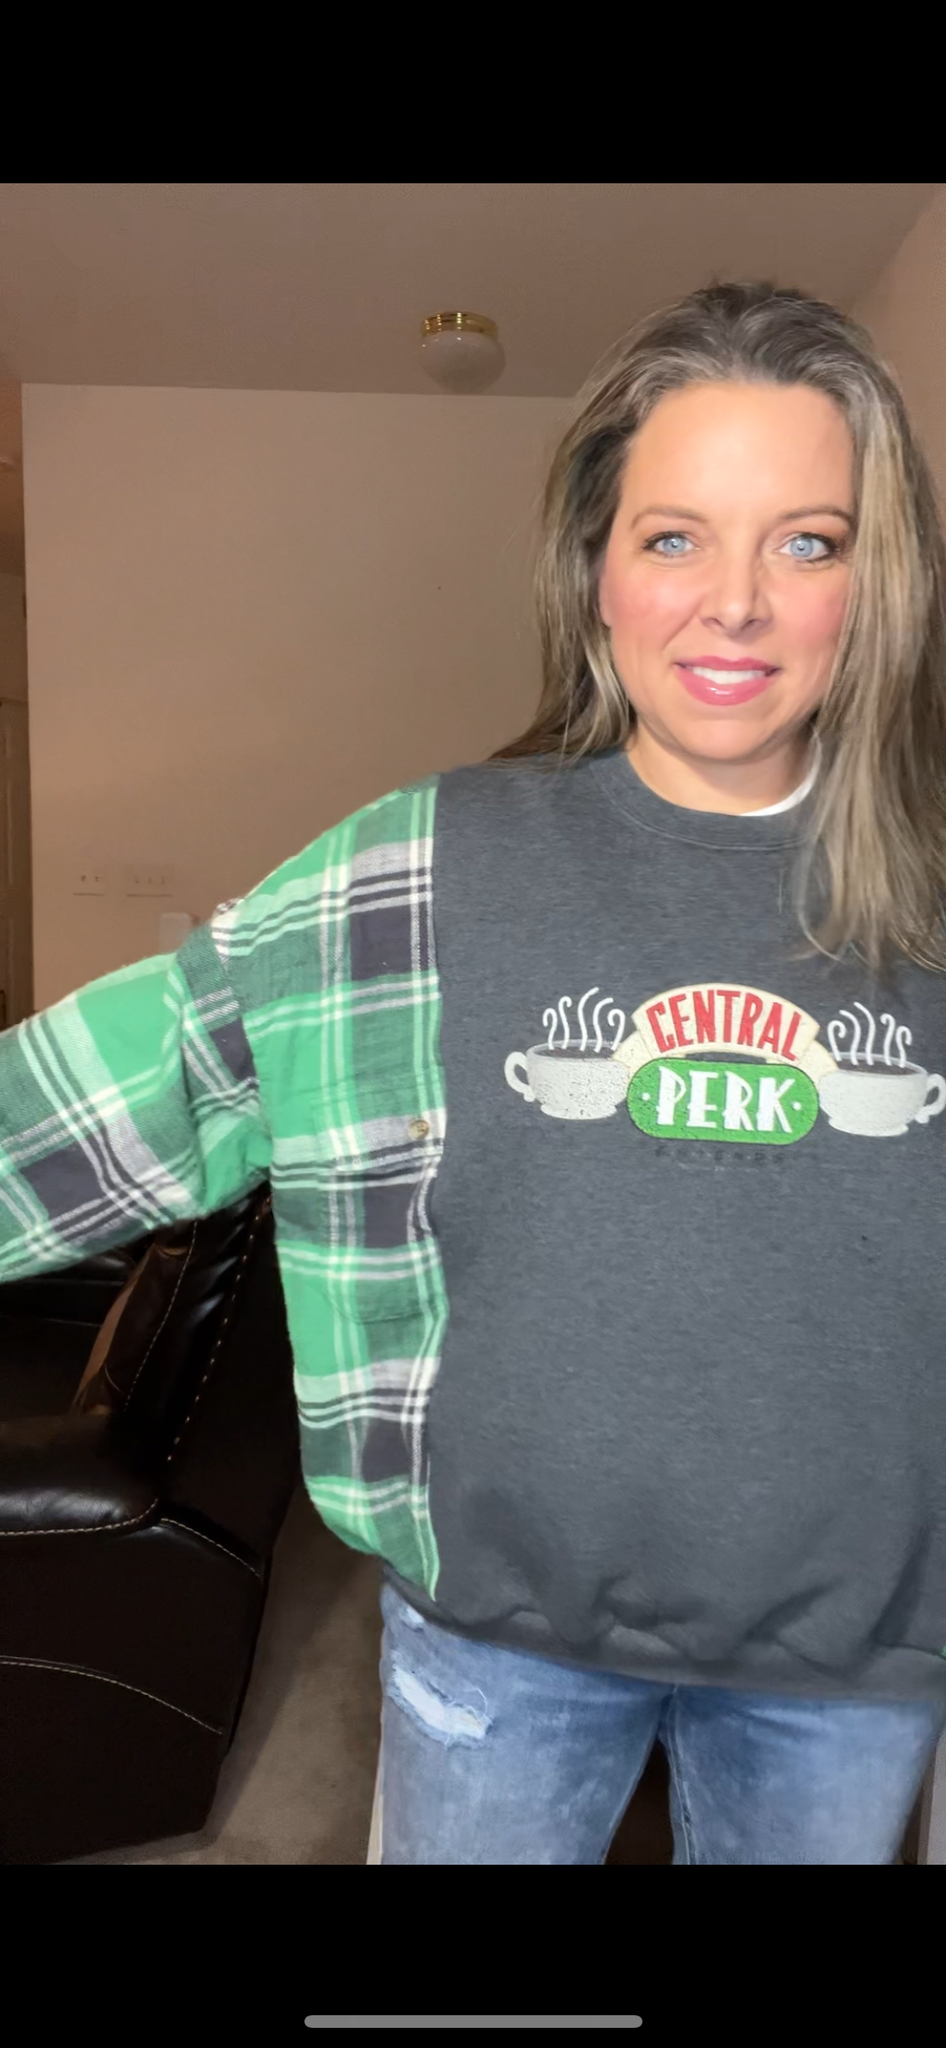 Upcycled Friends - Women’s large – midweight sweatshirt with soft flannel sleeves￼